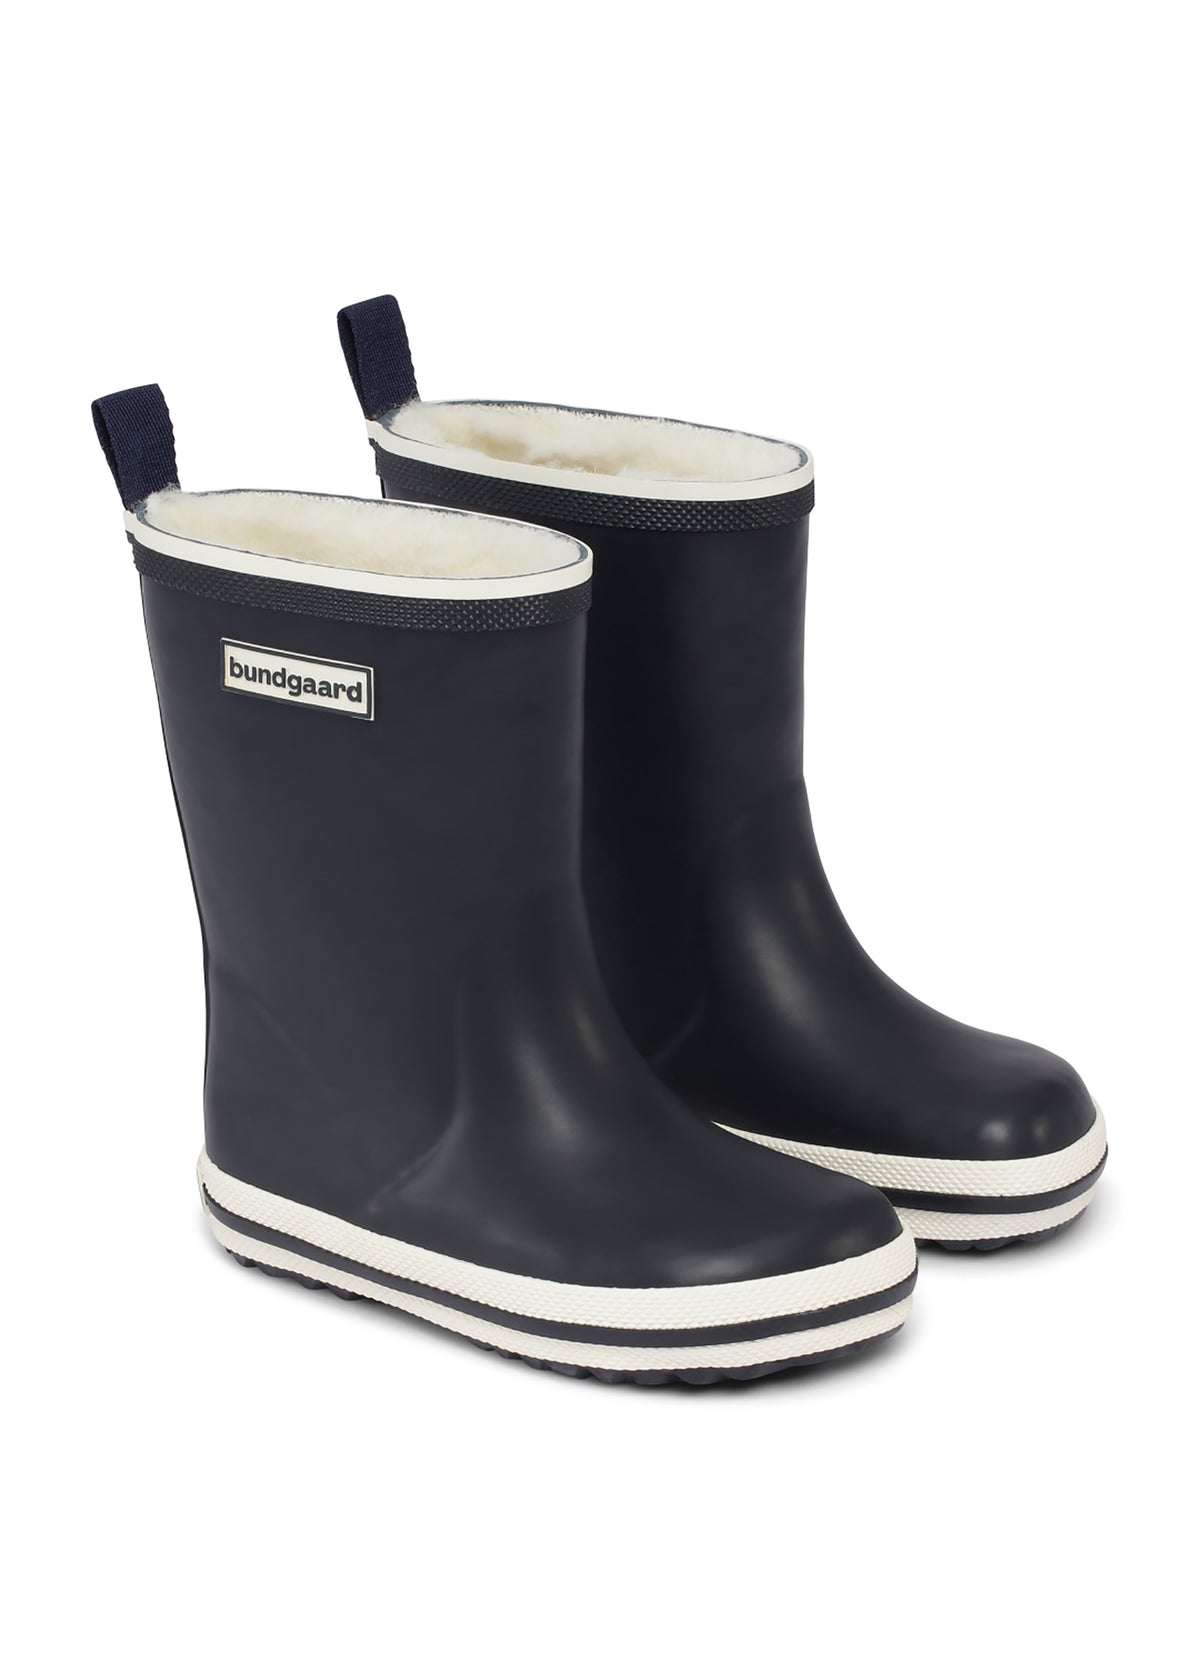 Rubber boots with a warm lining - dark blue, Charly High Warm